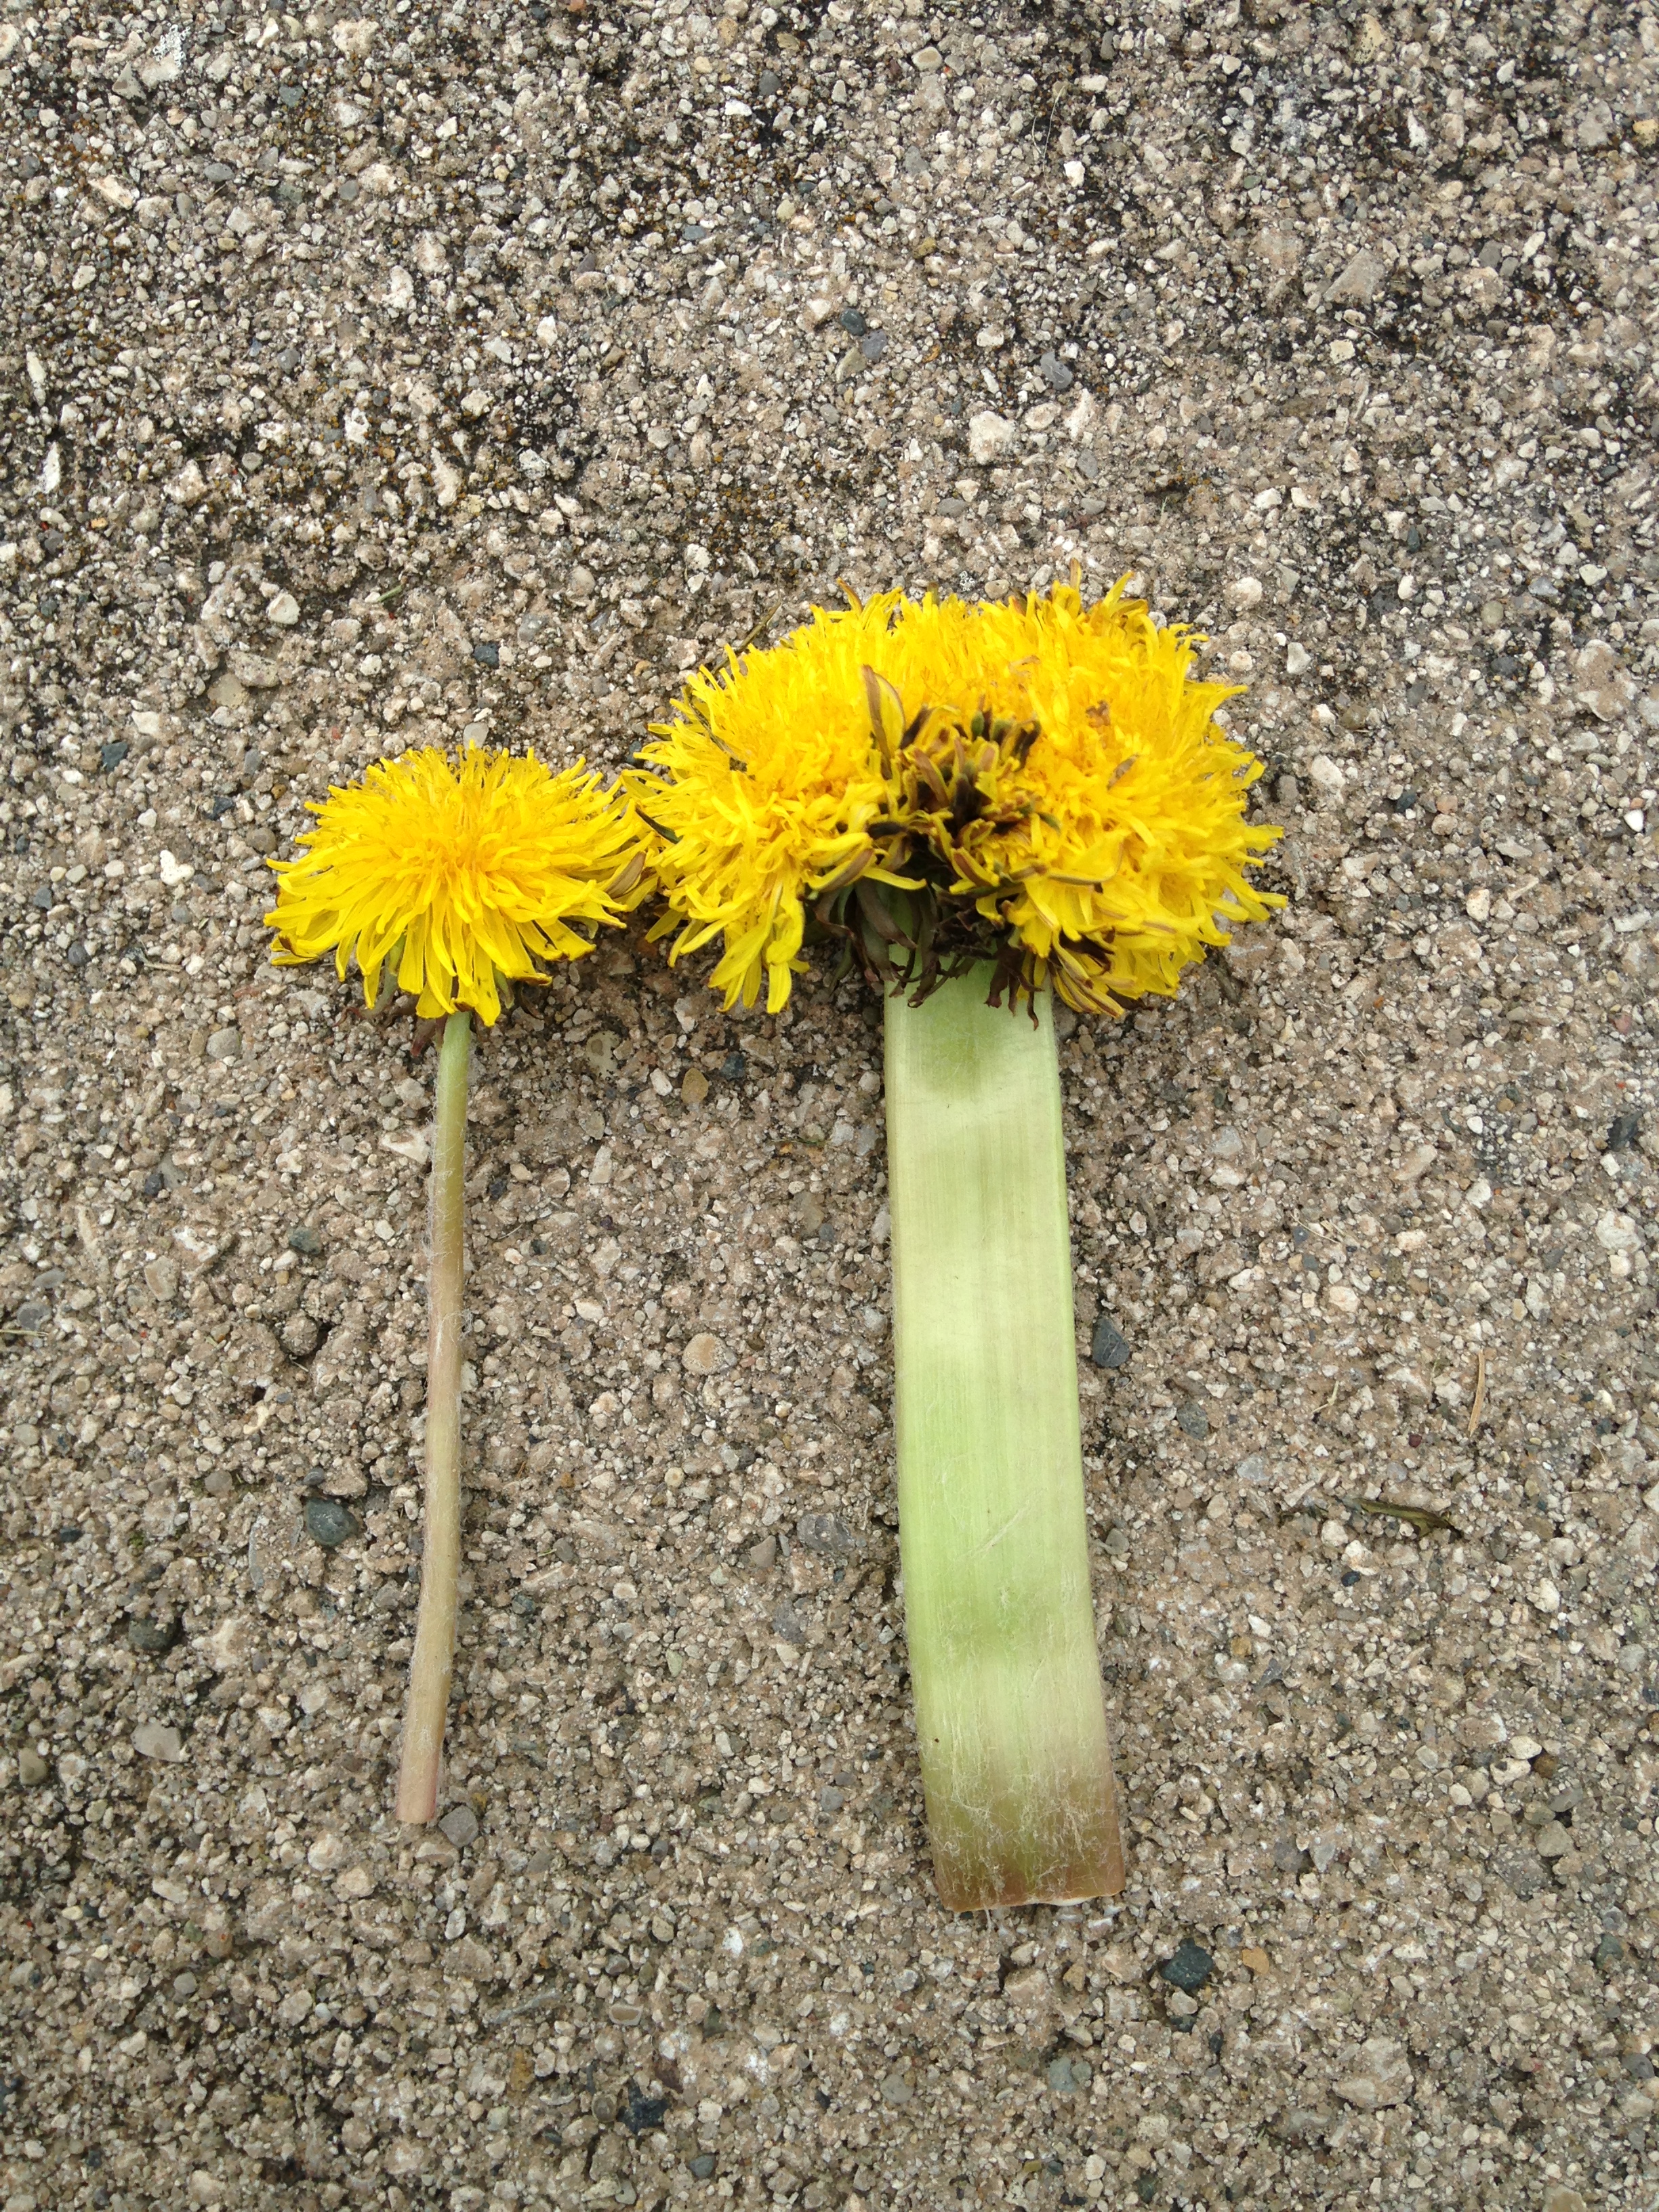 A group of dandelions fused, and grew together with one big stem ...